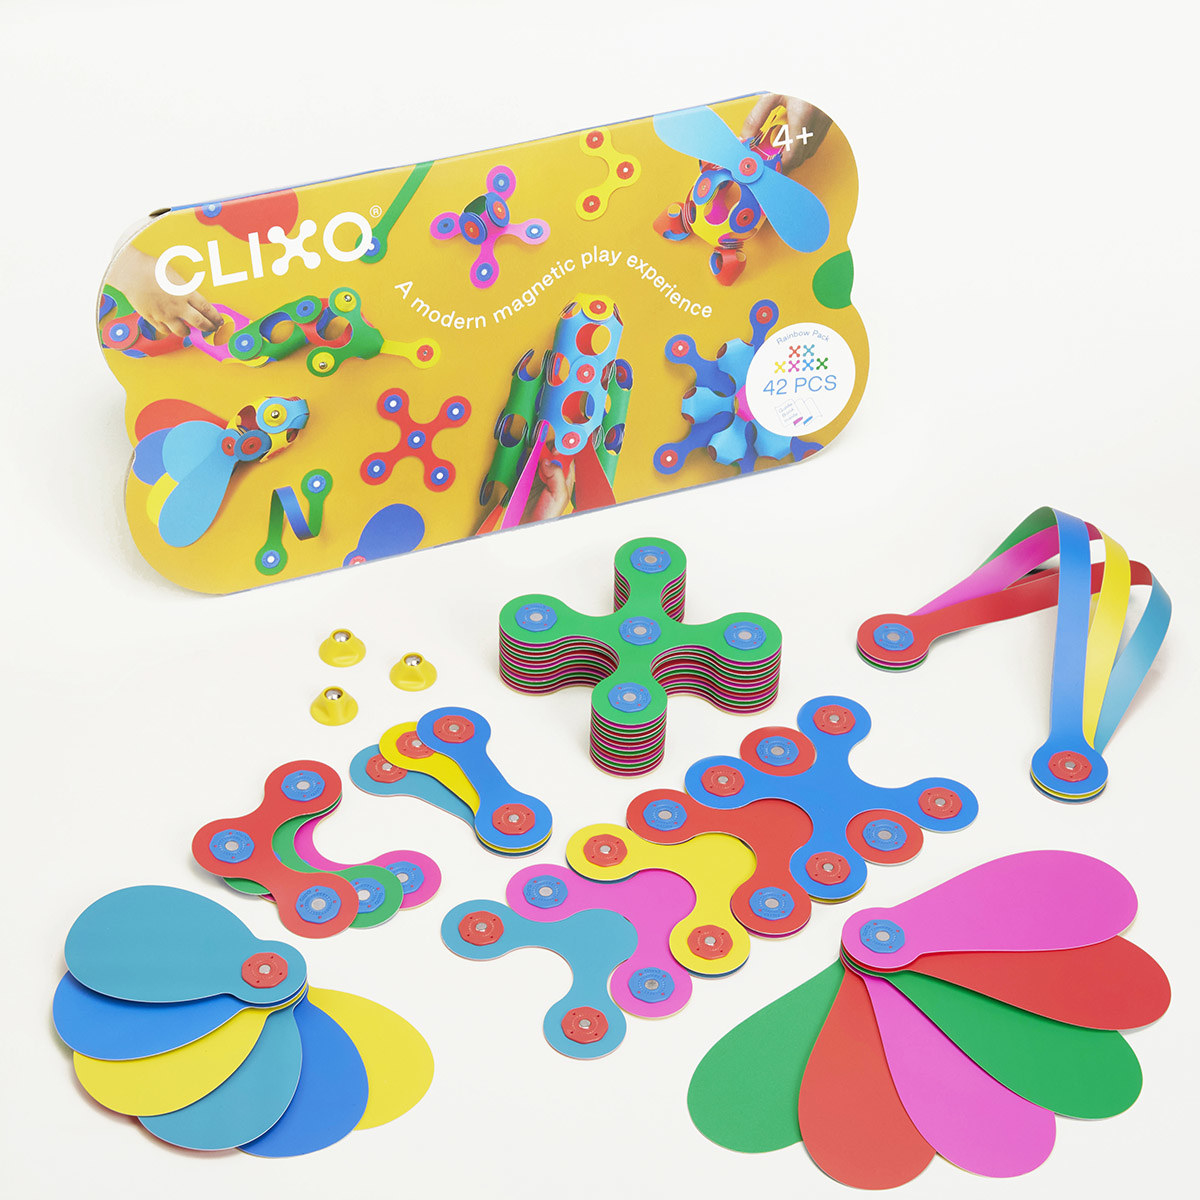 Complete packaging and parts for Clixo rainbow kit